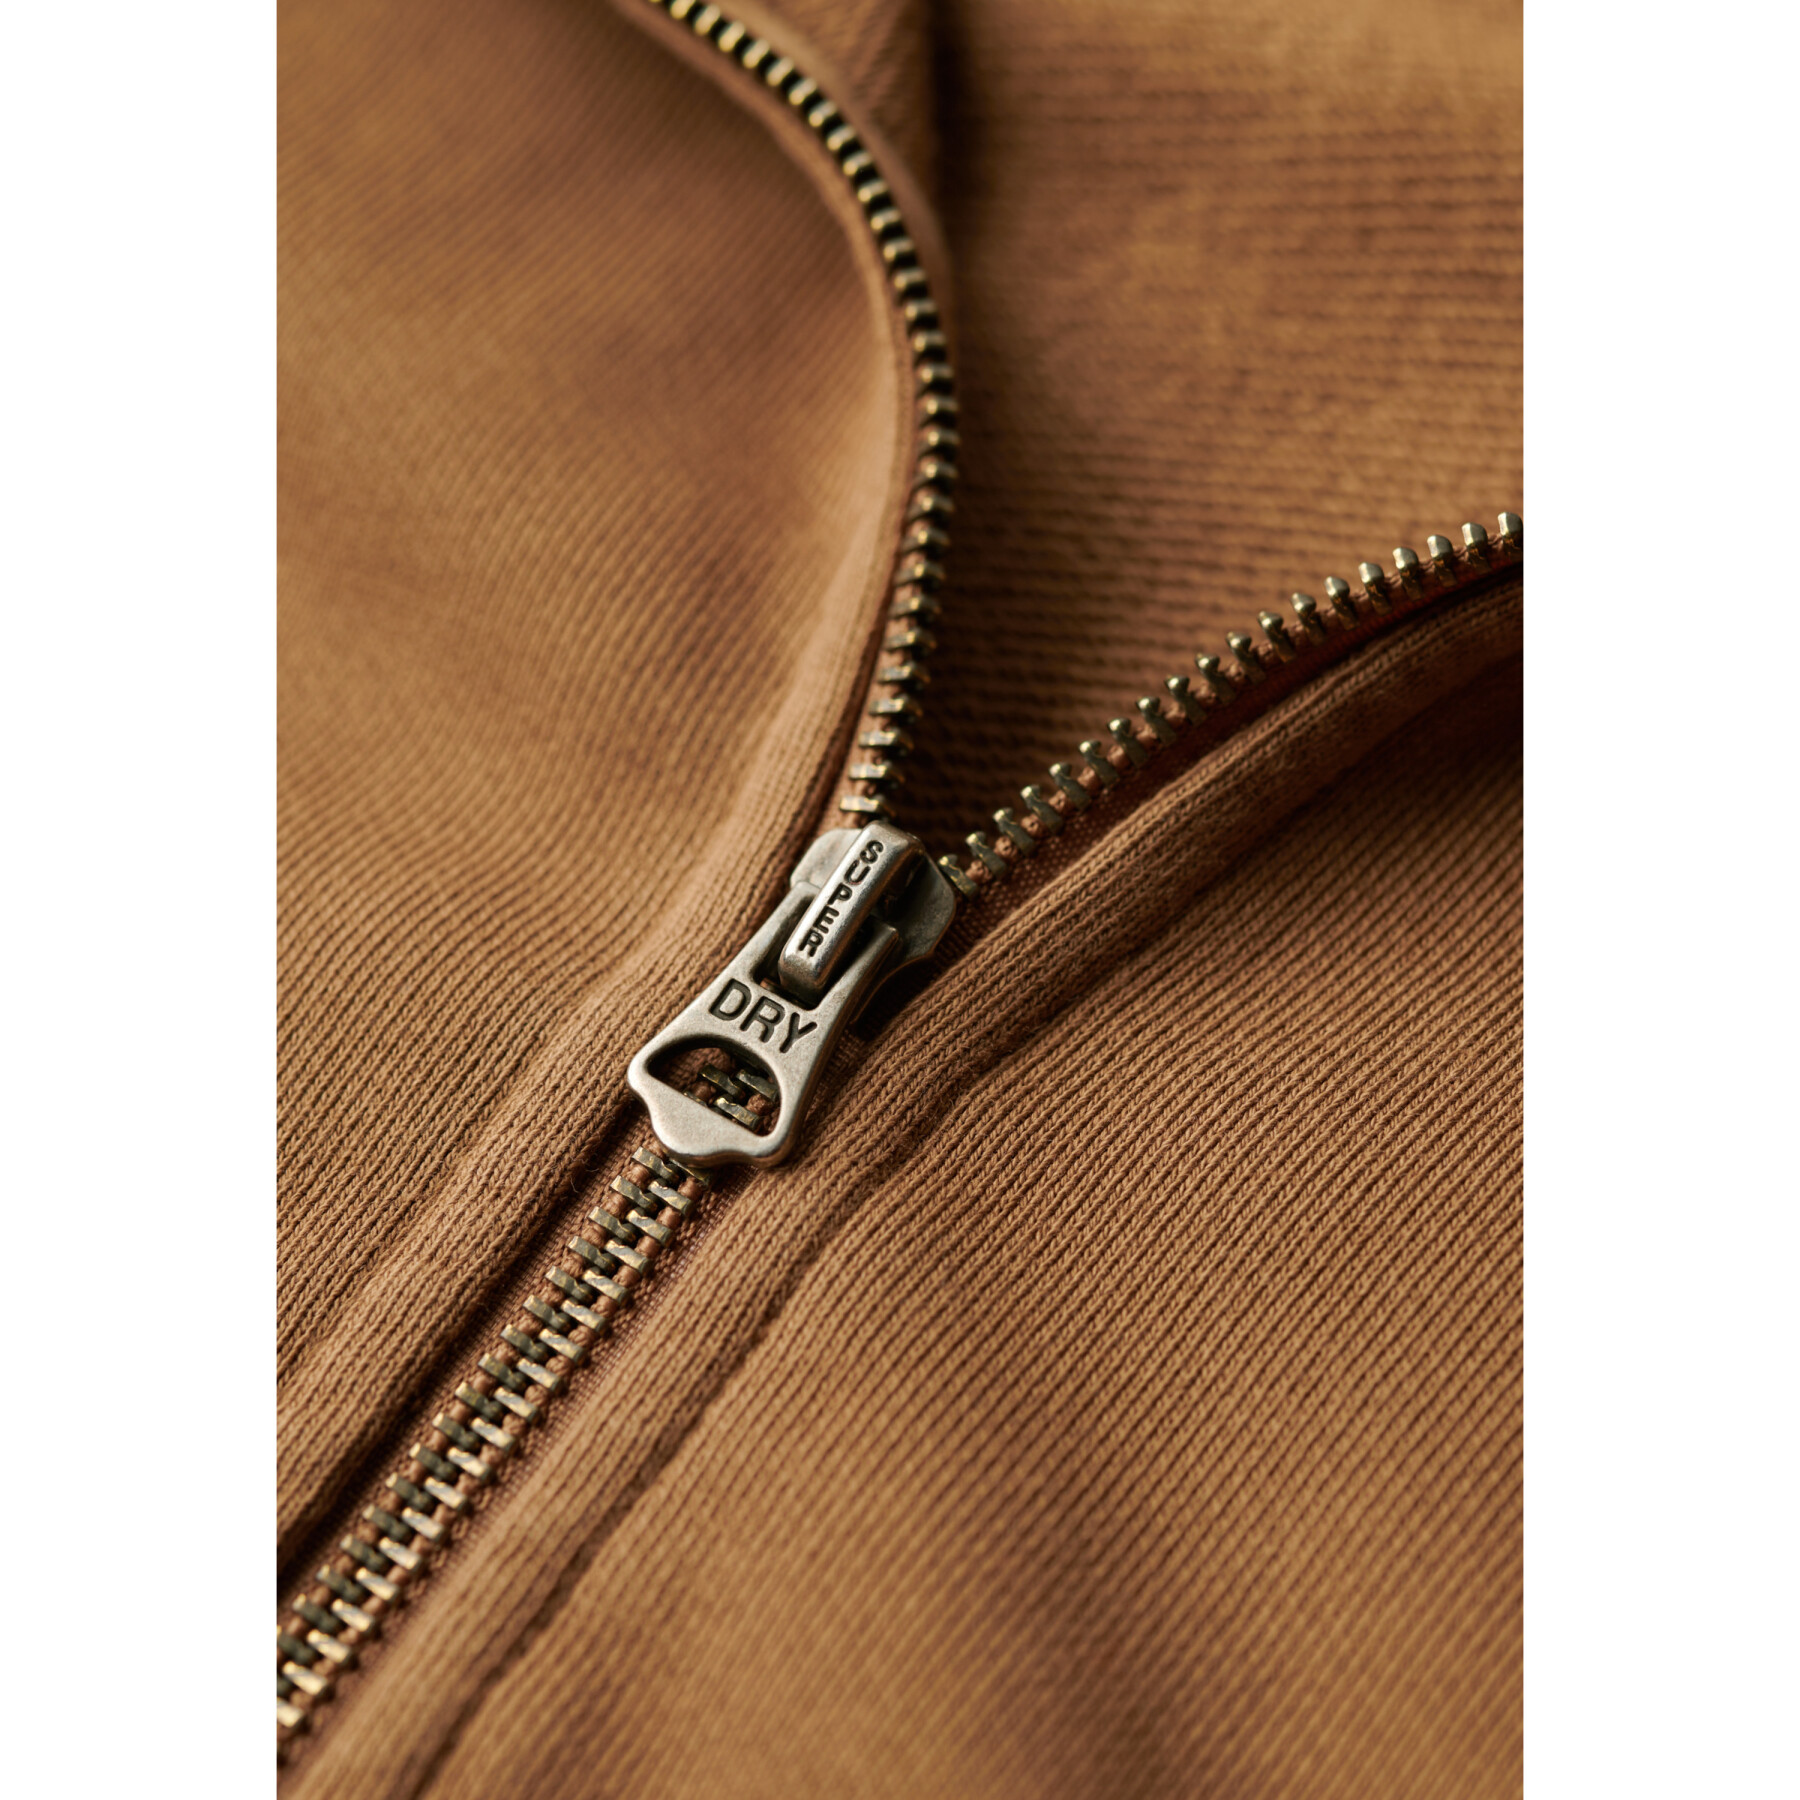 Casual zip-up hoodie with contrast stitching Superdry